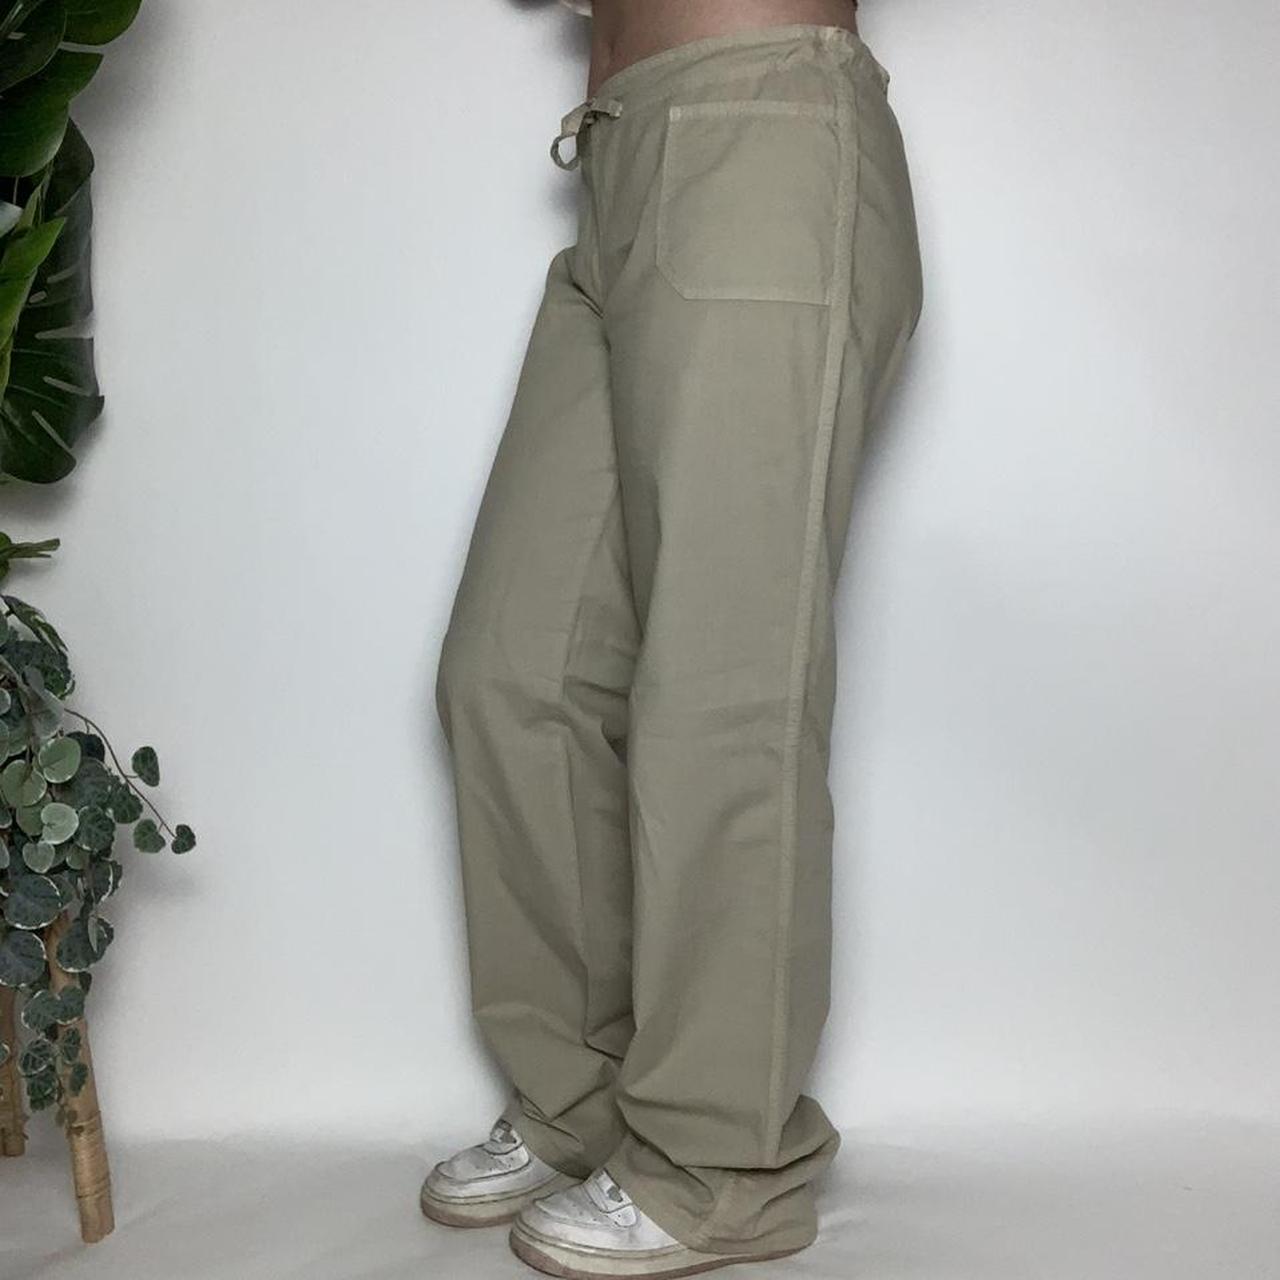 Y2K COOL GIRL 🧞‍♀️ vintage 90s tan cargo trousers